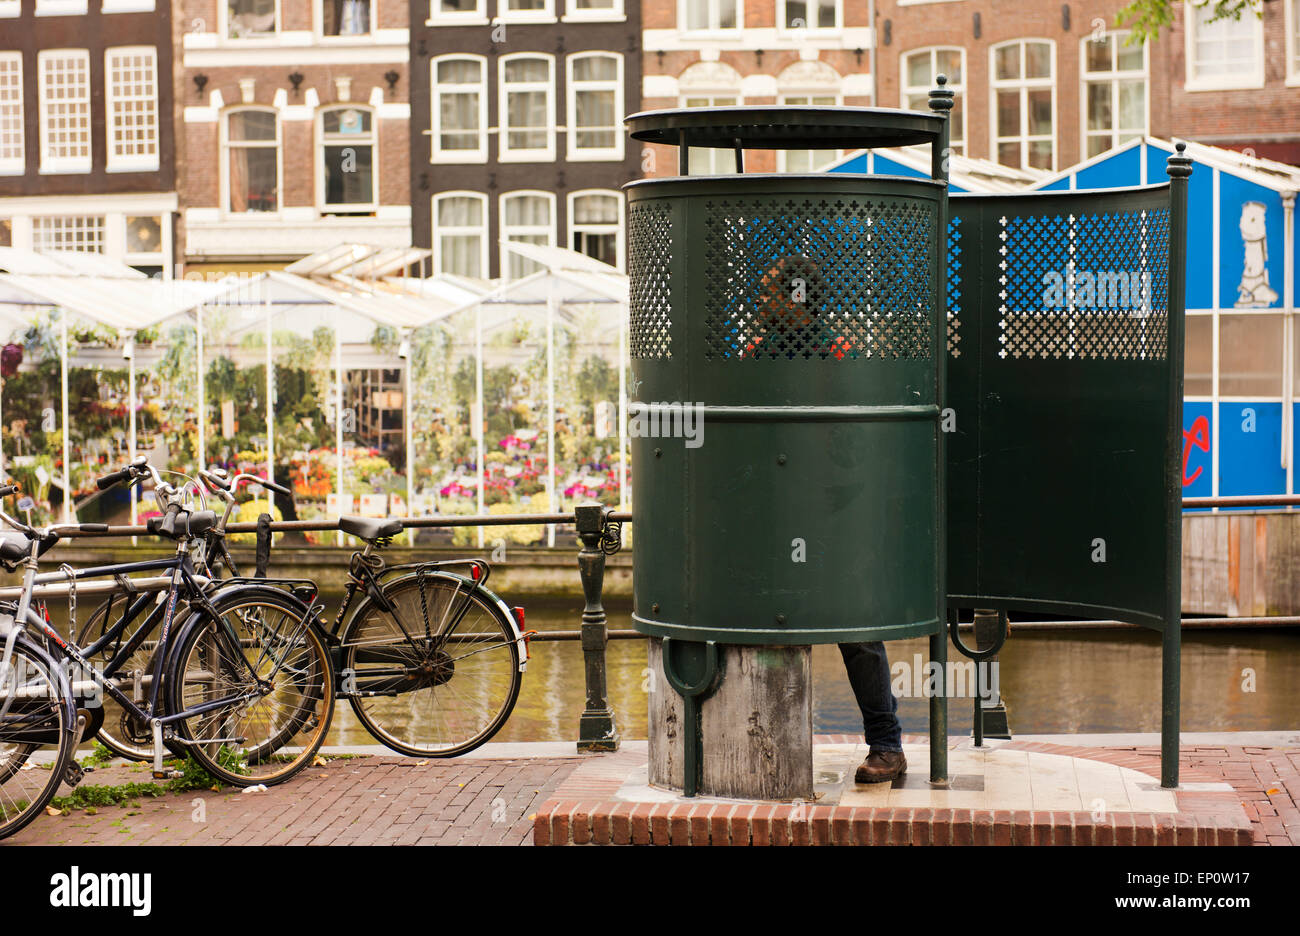 Urinal in use in Amsterdam's Old Town. Stock Photo